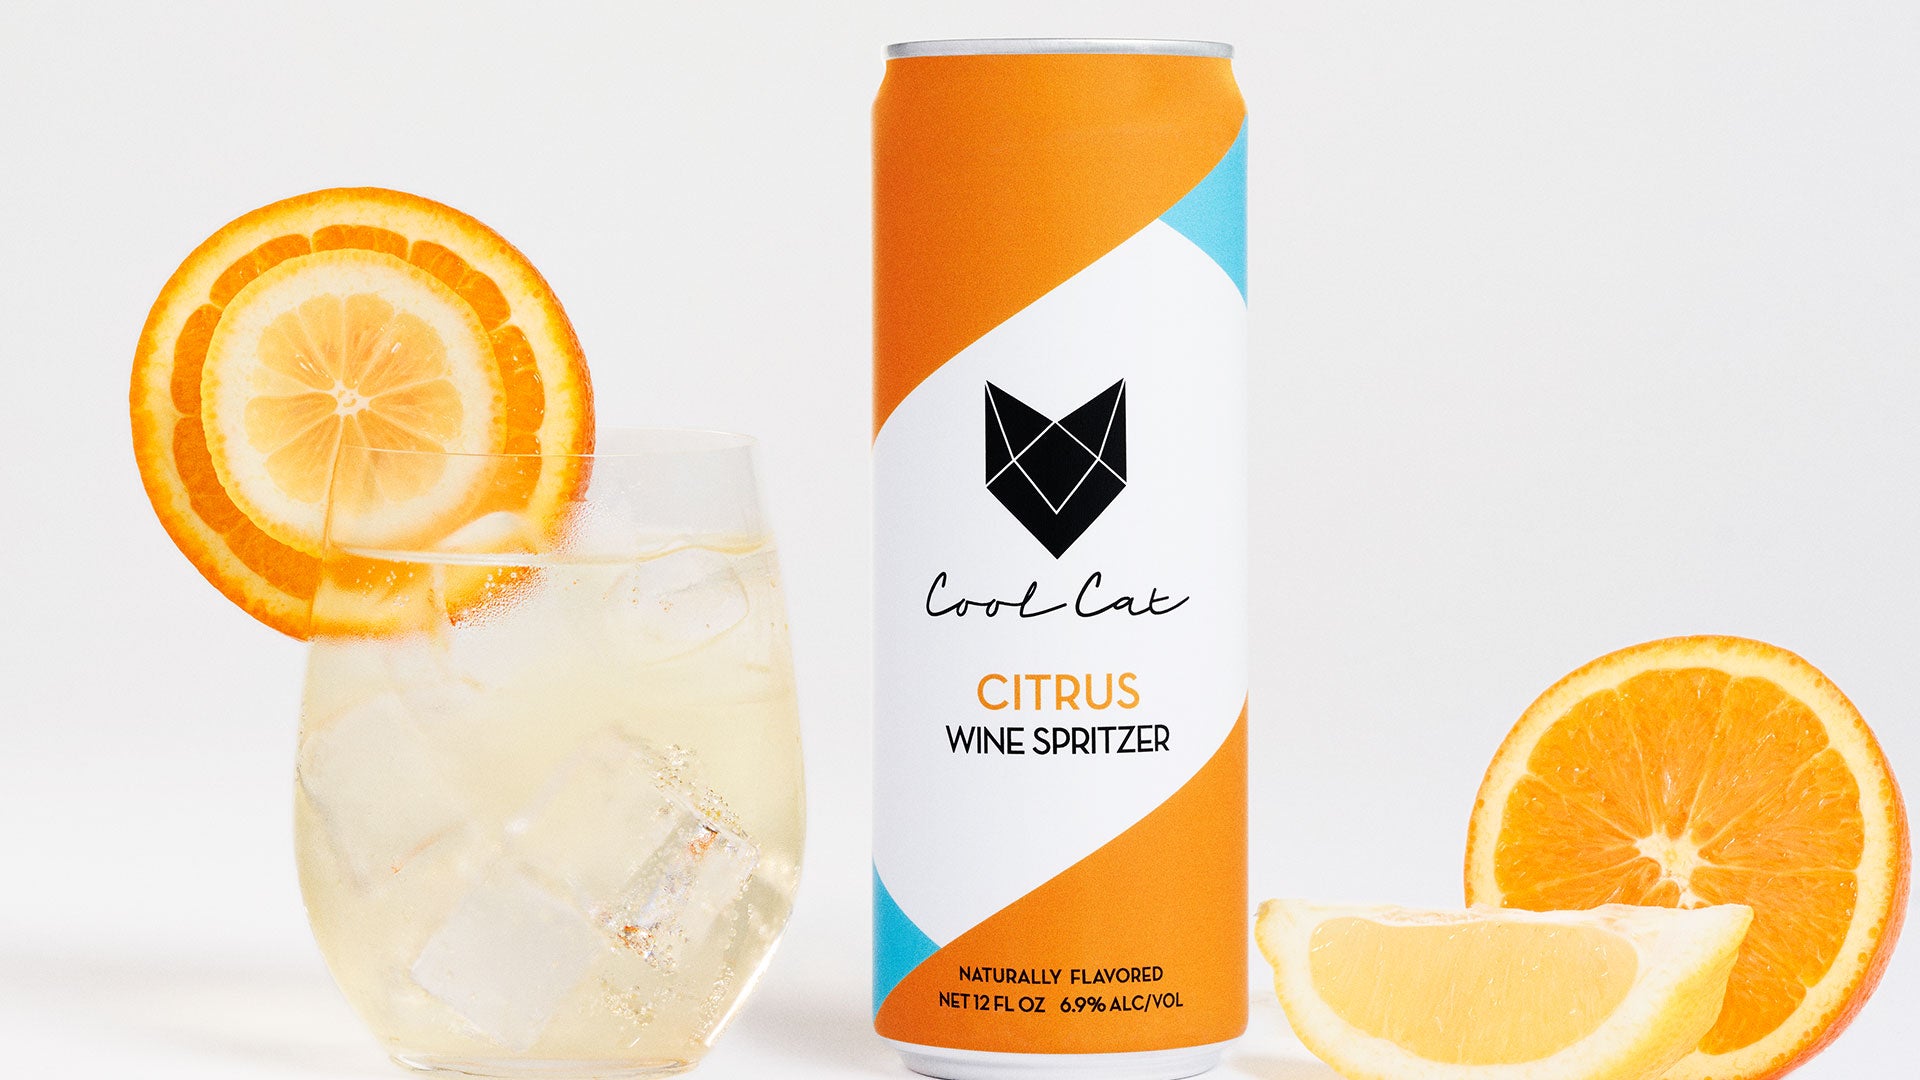 Cool Cat Citrus Sparkling Cocktail next to a glass garnished with oranges and lemons.